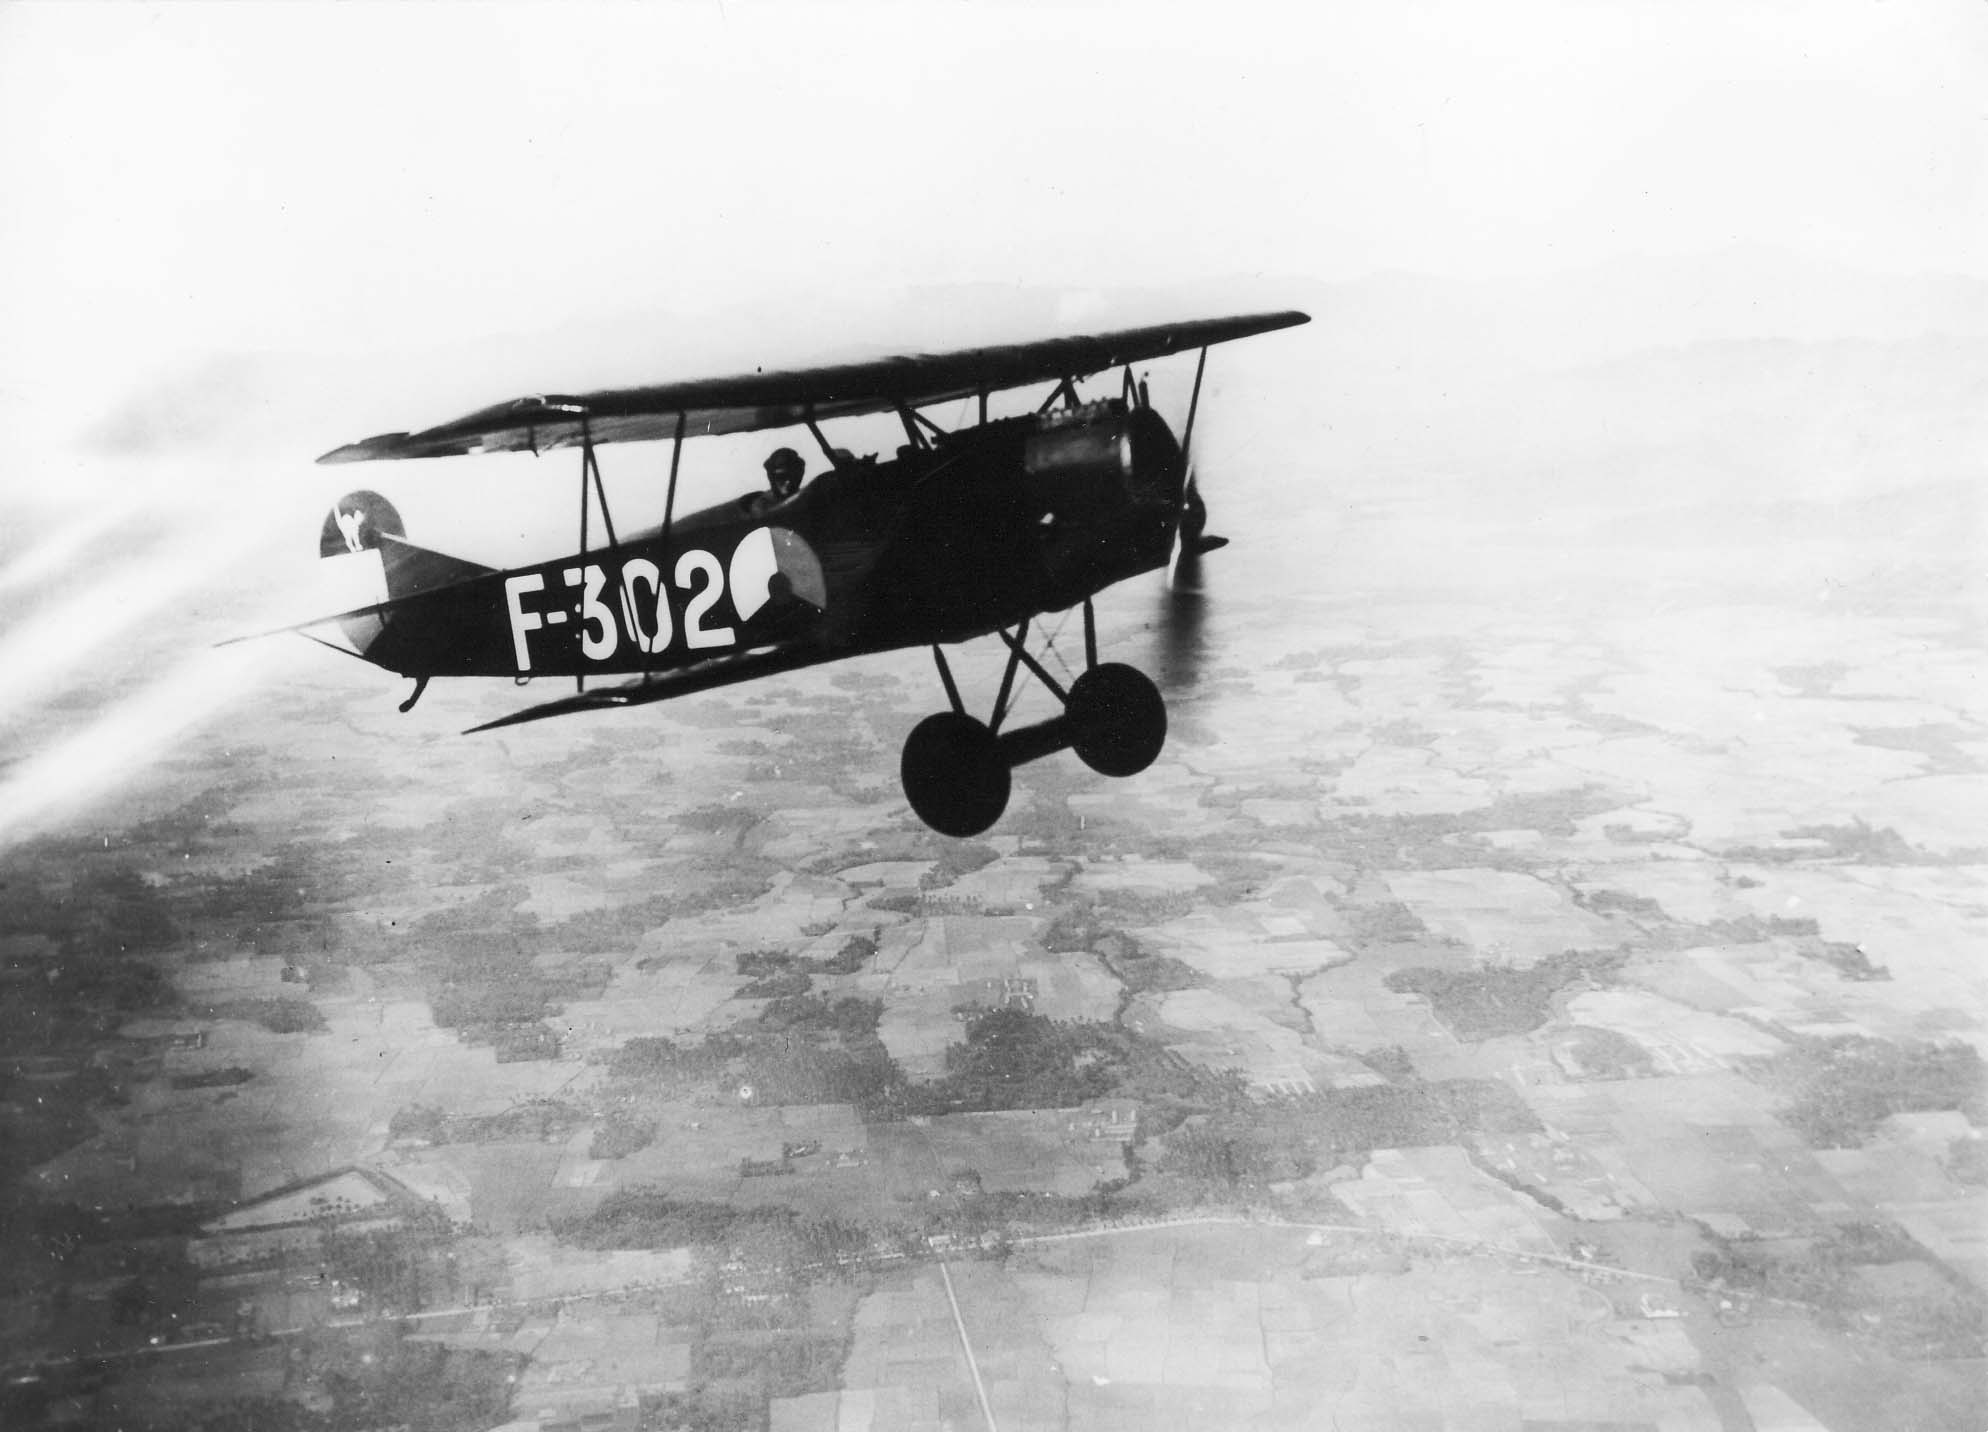 LA-KNIL Fokker D.VII F-302 over the Dutch East Indies countryside